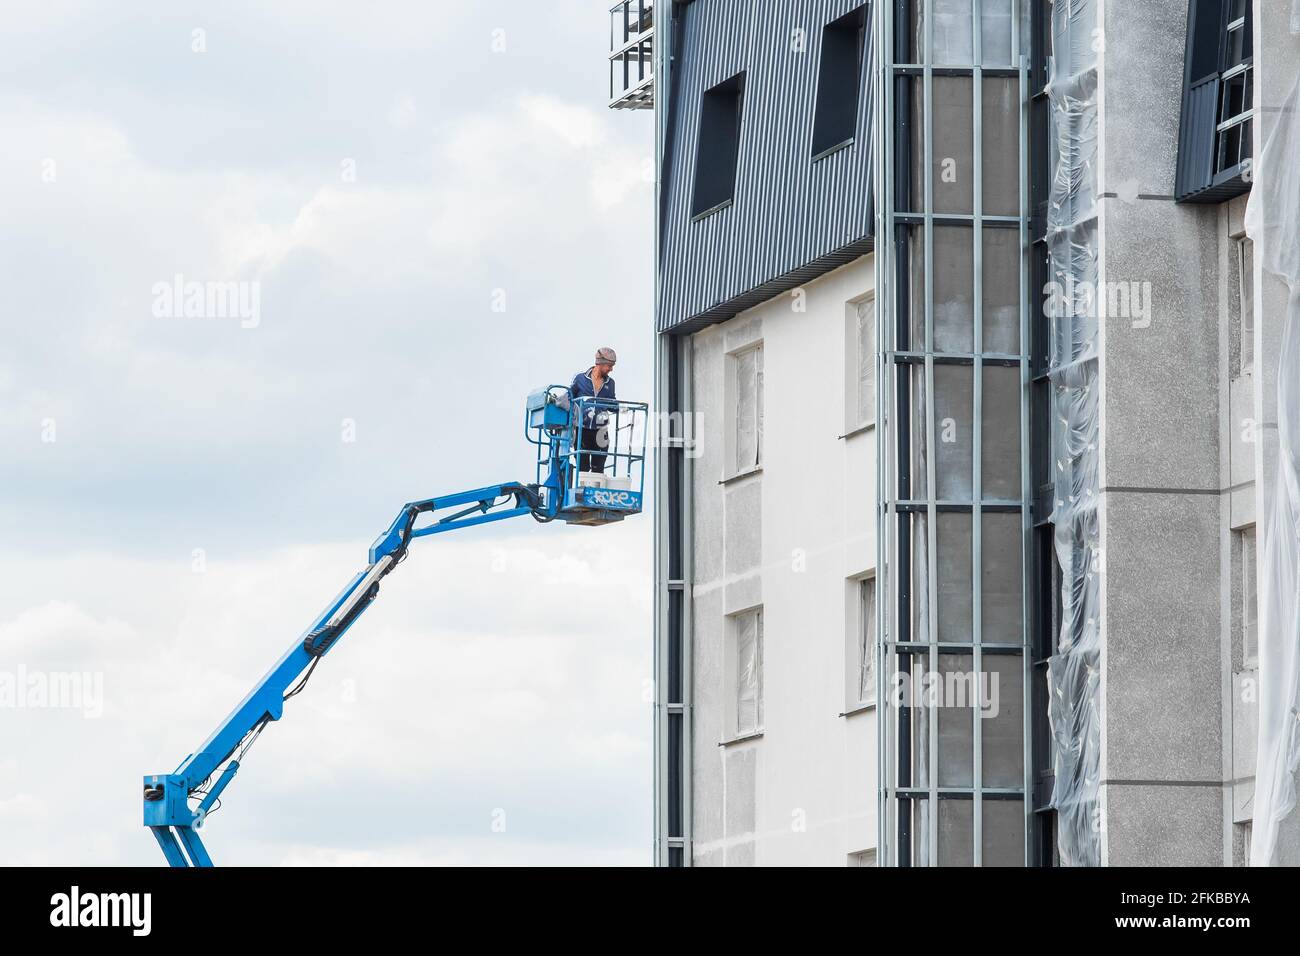 Belarus, Minsk - May 28, 2020: Industrial worker on a lifting platform near a new facade of a house under construction at a construction site. Stock Photo